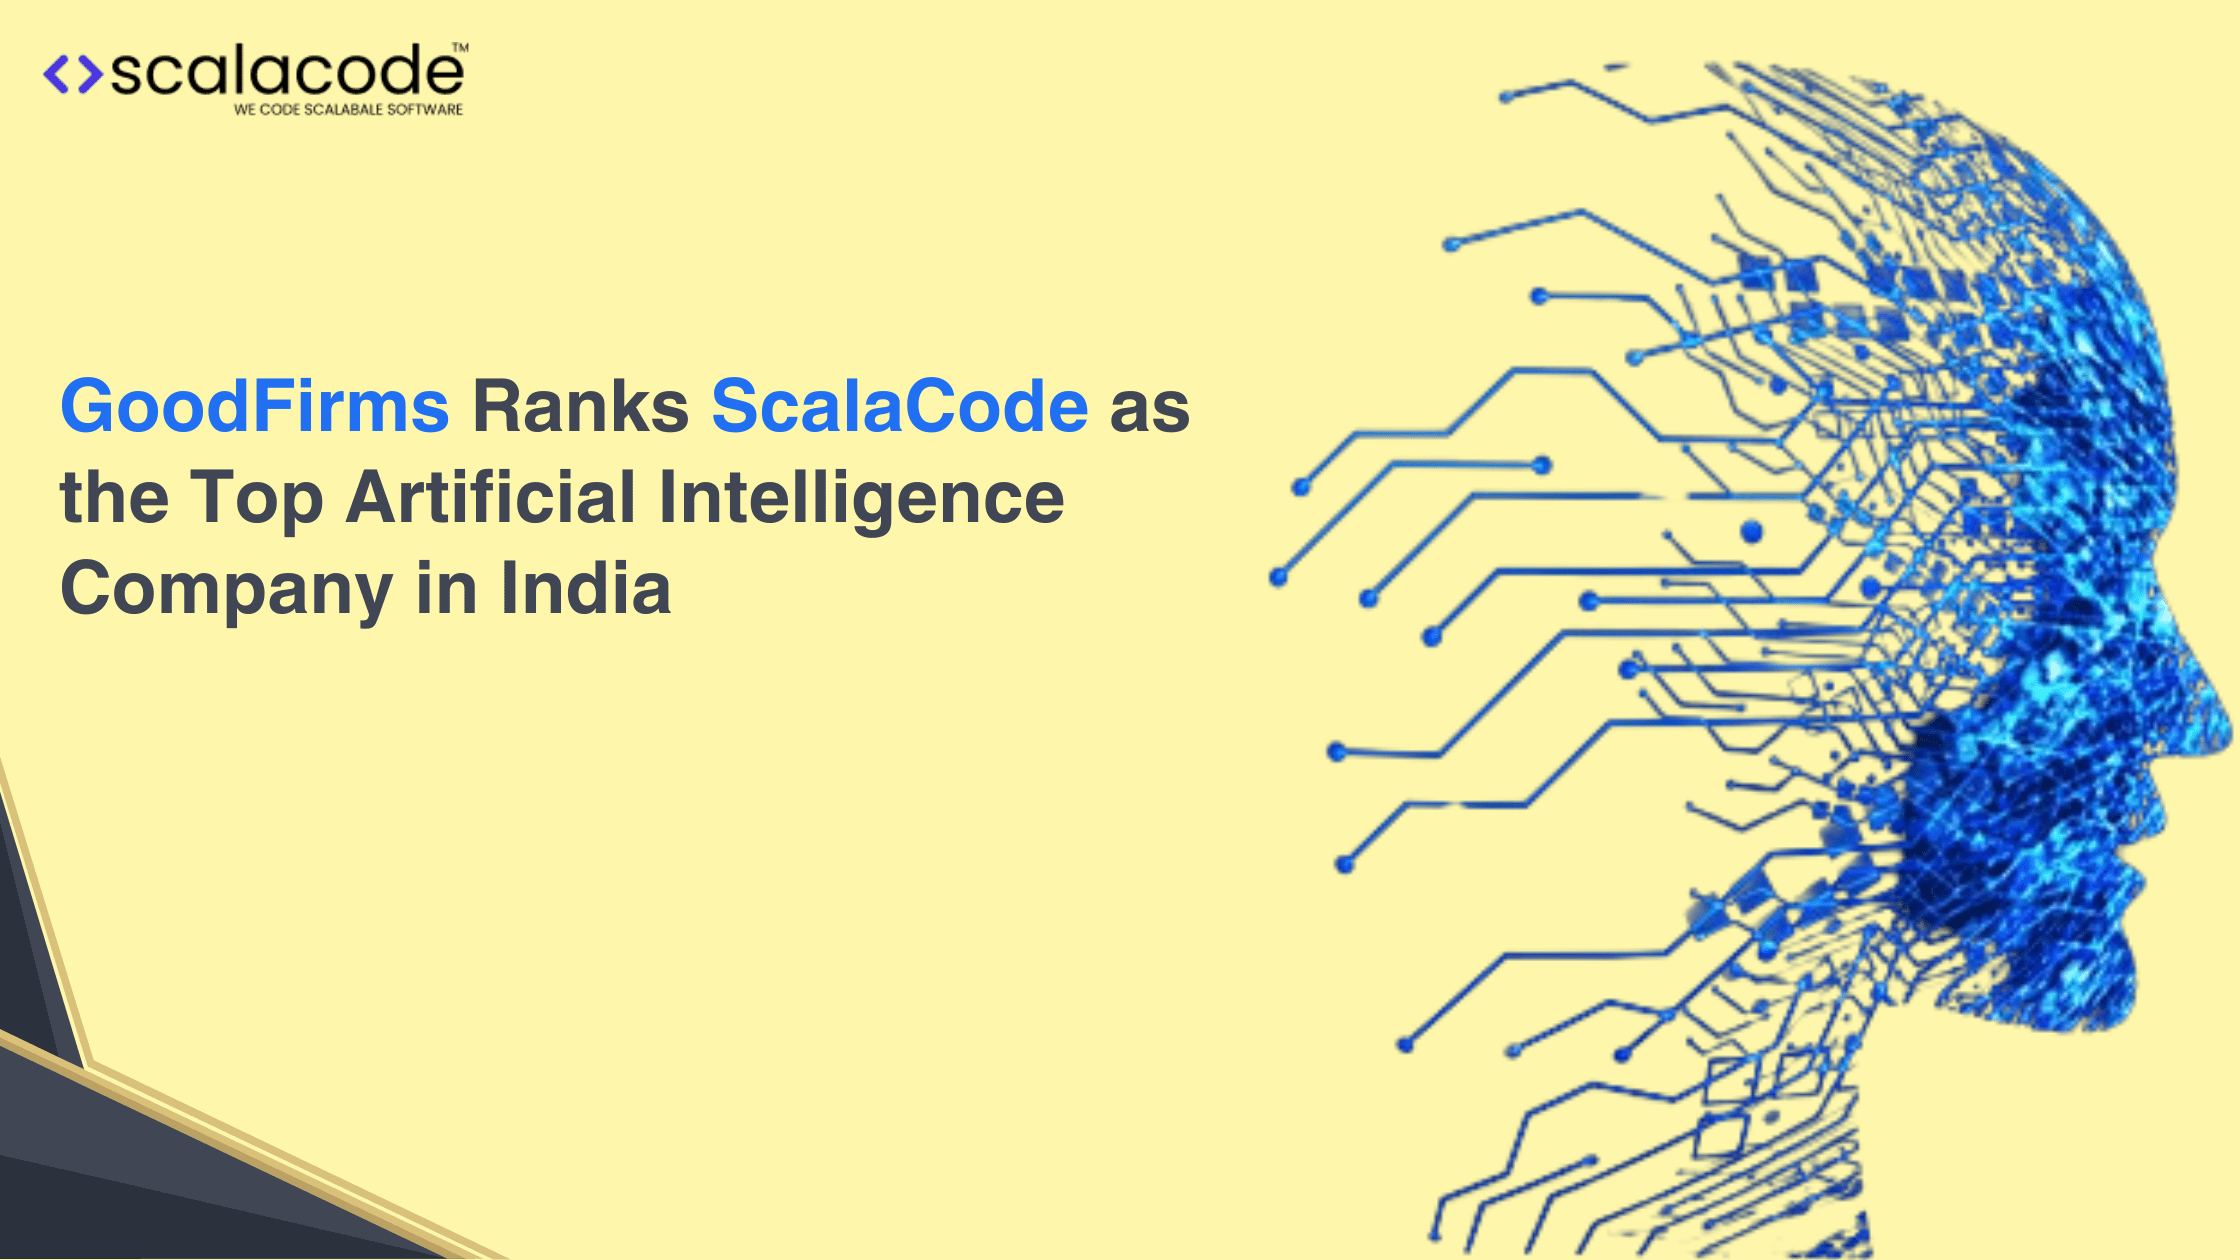 GoodFirms Ranks ScalaCode as the Top Artificial Intelligence Company in India